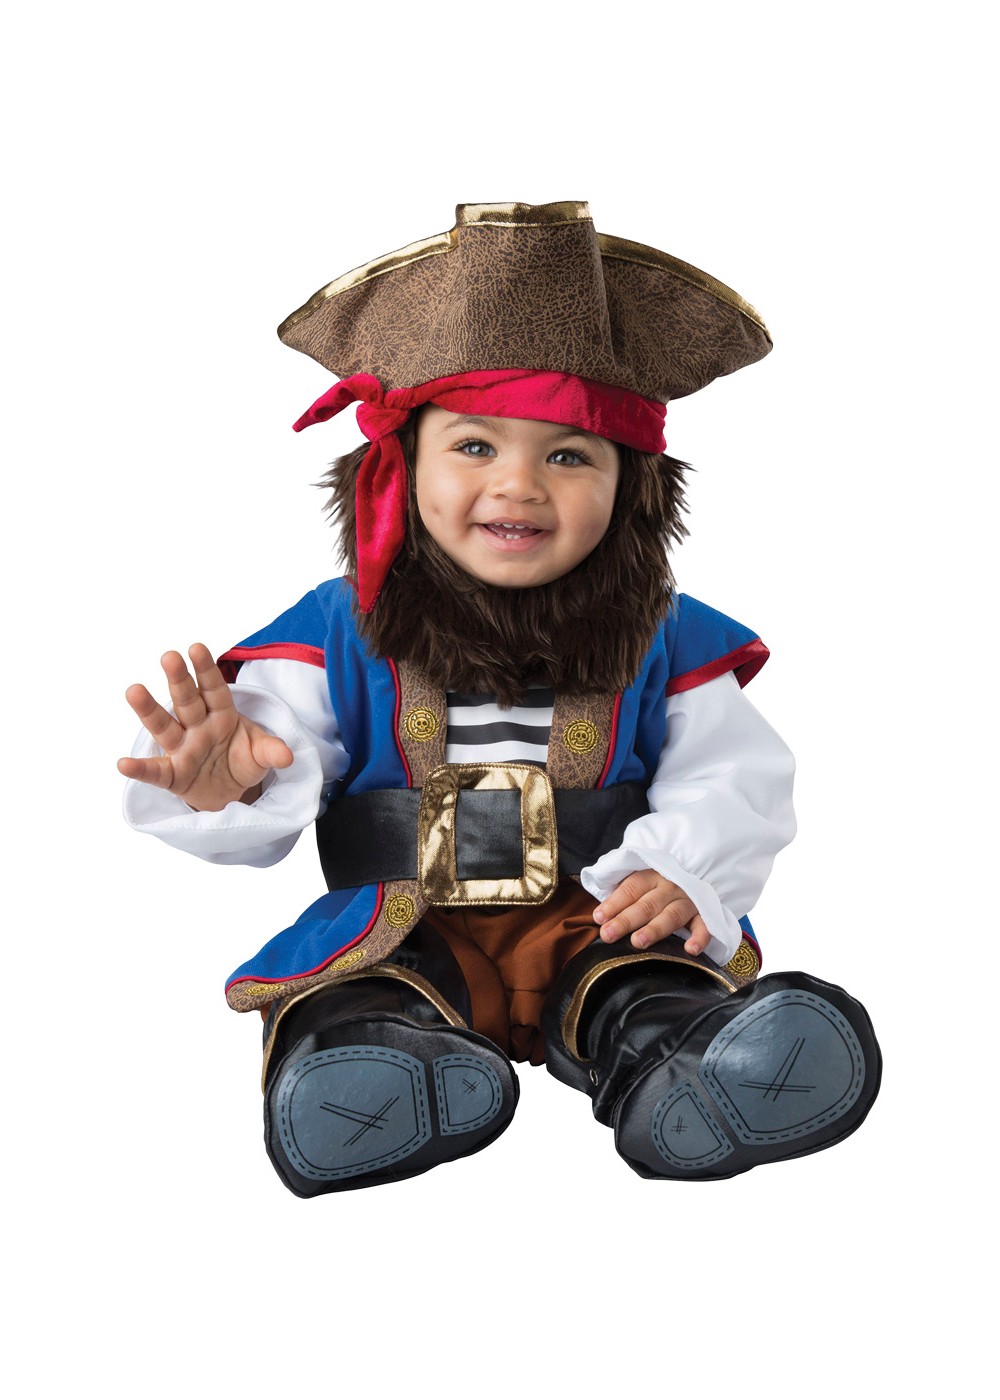 Toddlers Swashbuckler Pirate Costume